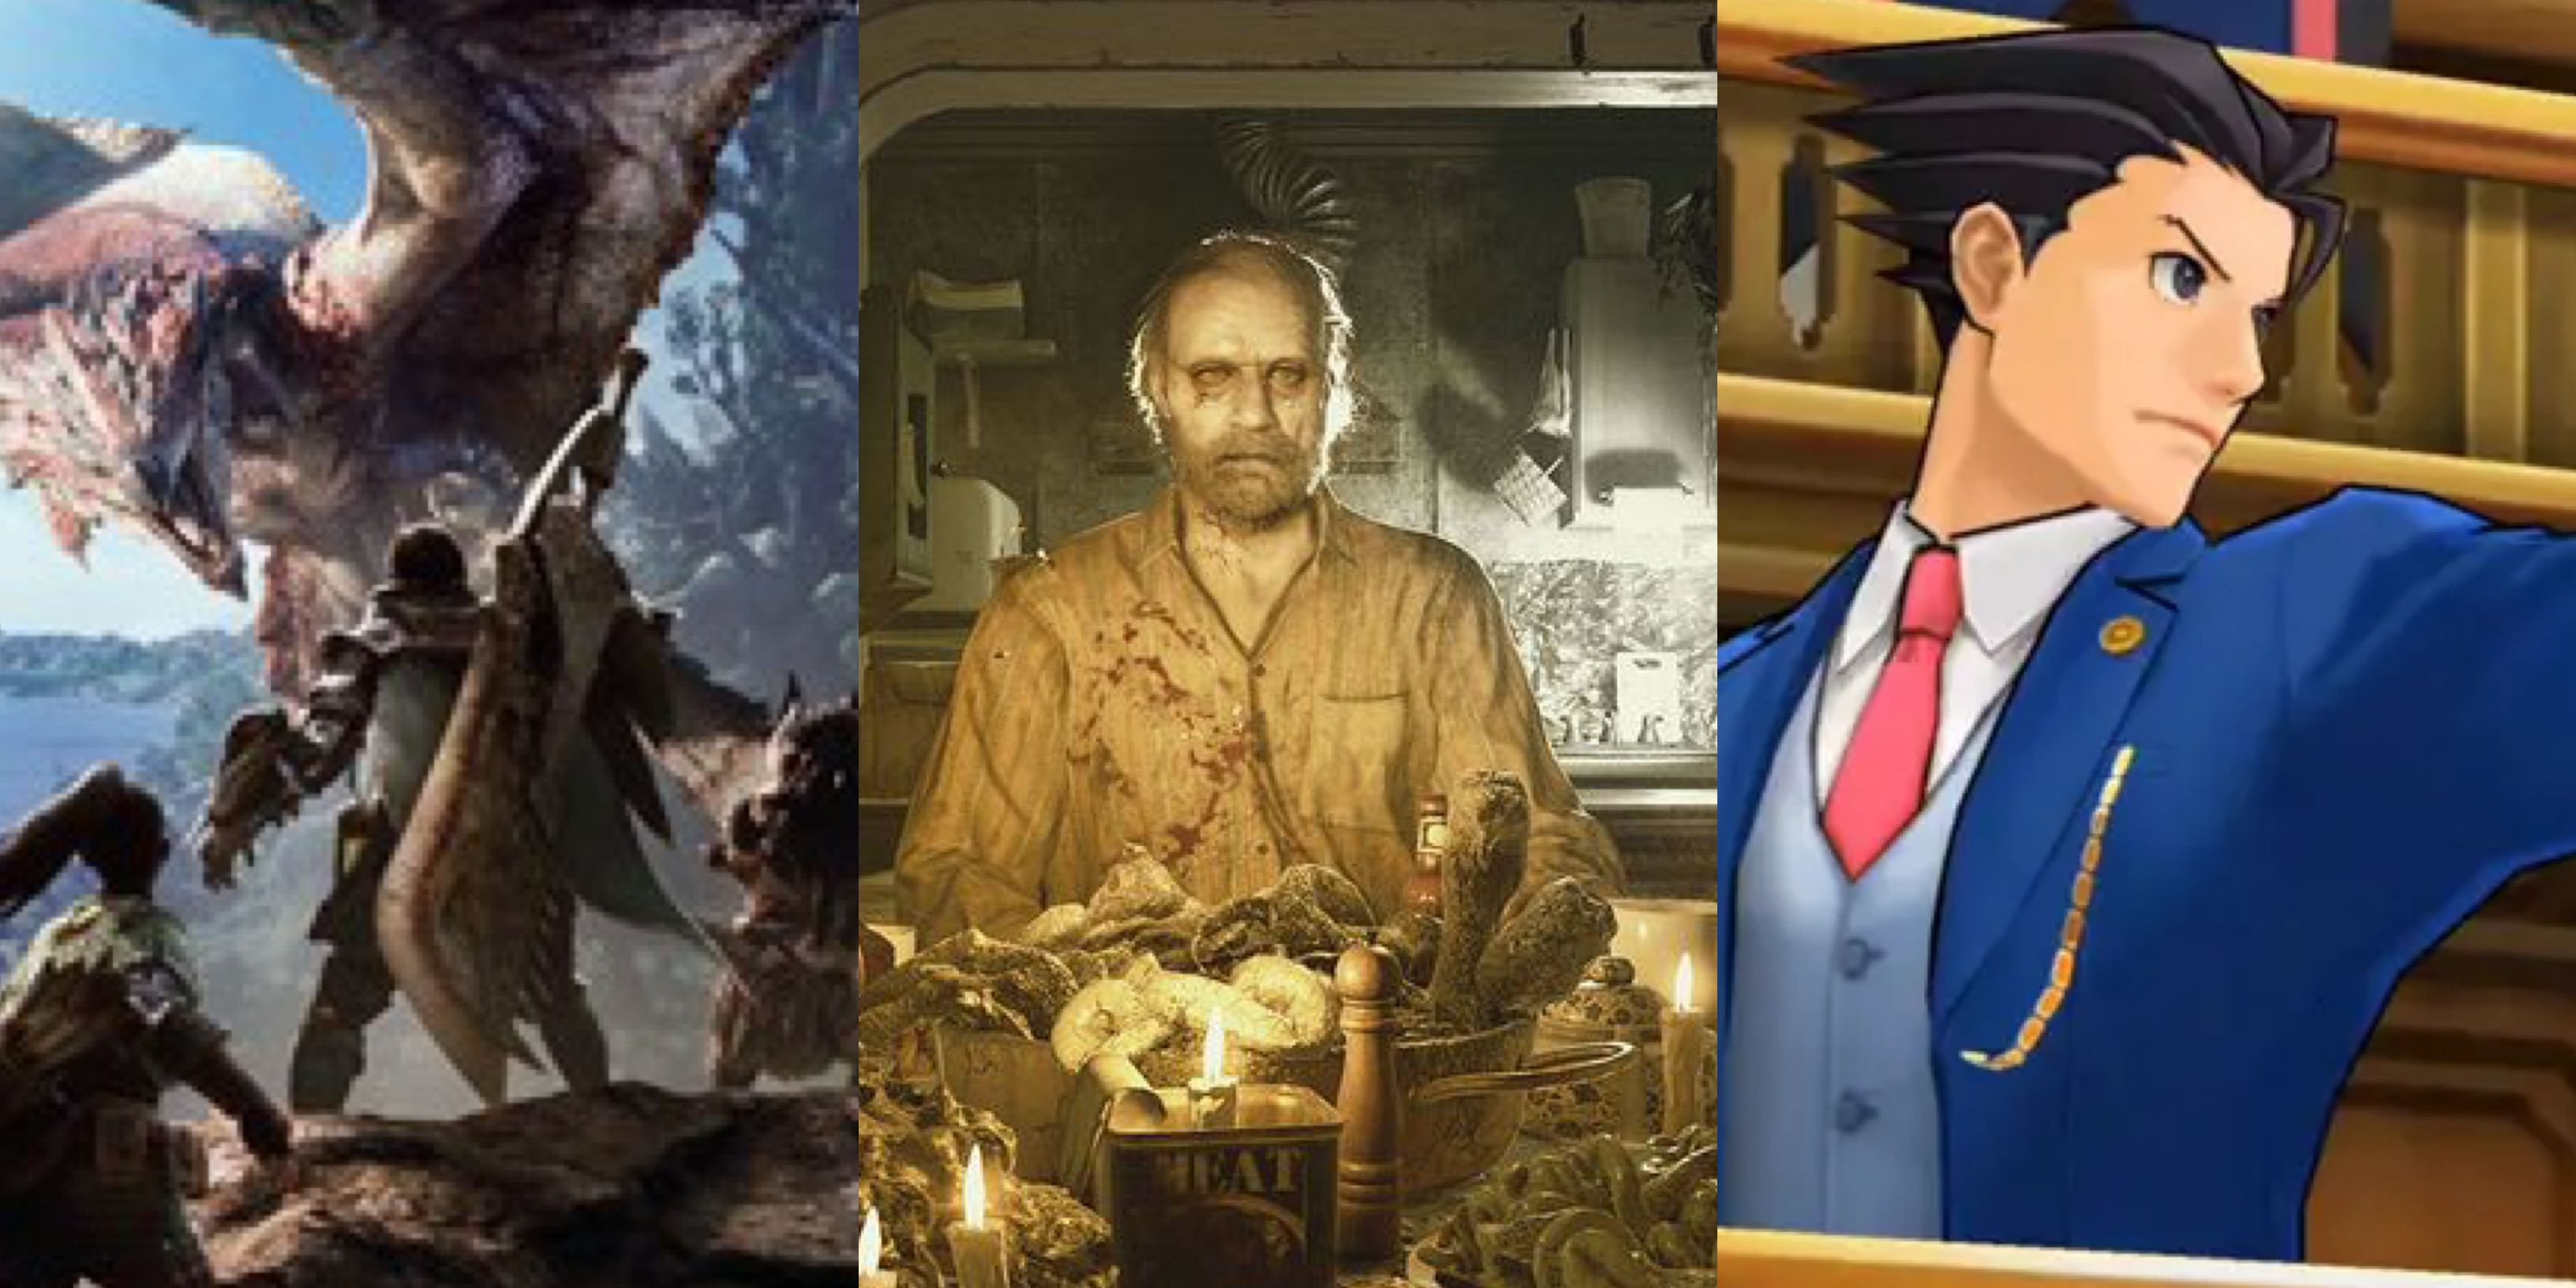 Philosophical Capcom Games: Monster Hunter: World (left), Resident Evil: Biohazard (middle), Phoenix Wright: Ace Attorney - Dual Destinies (right)